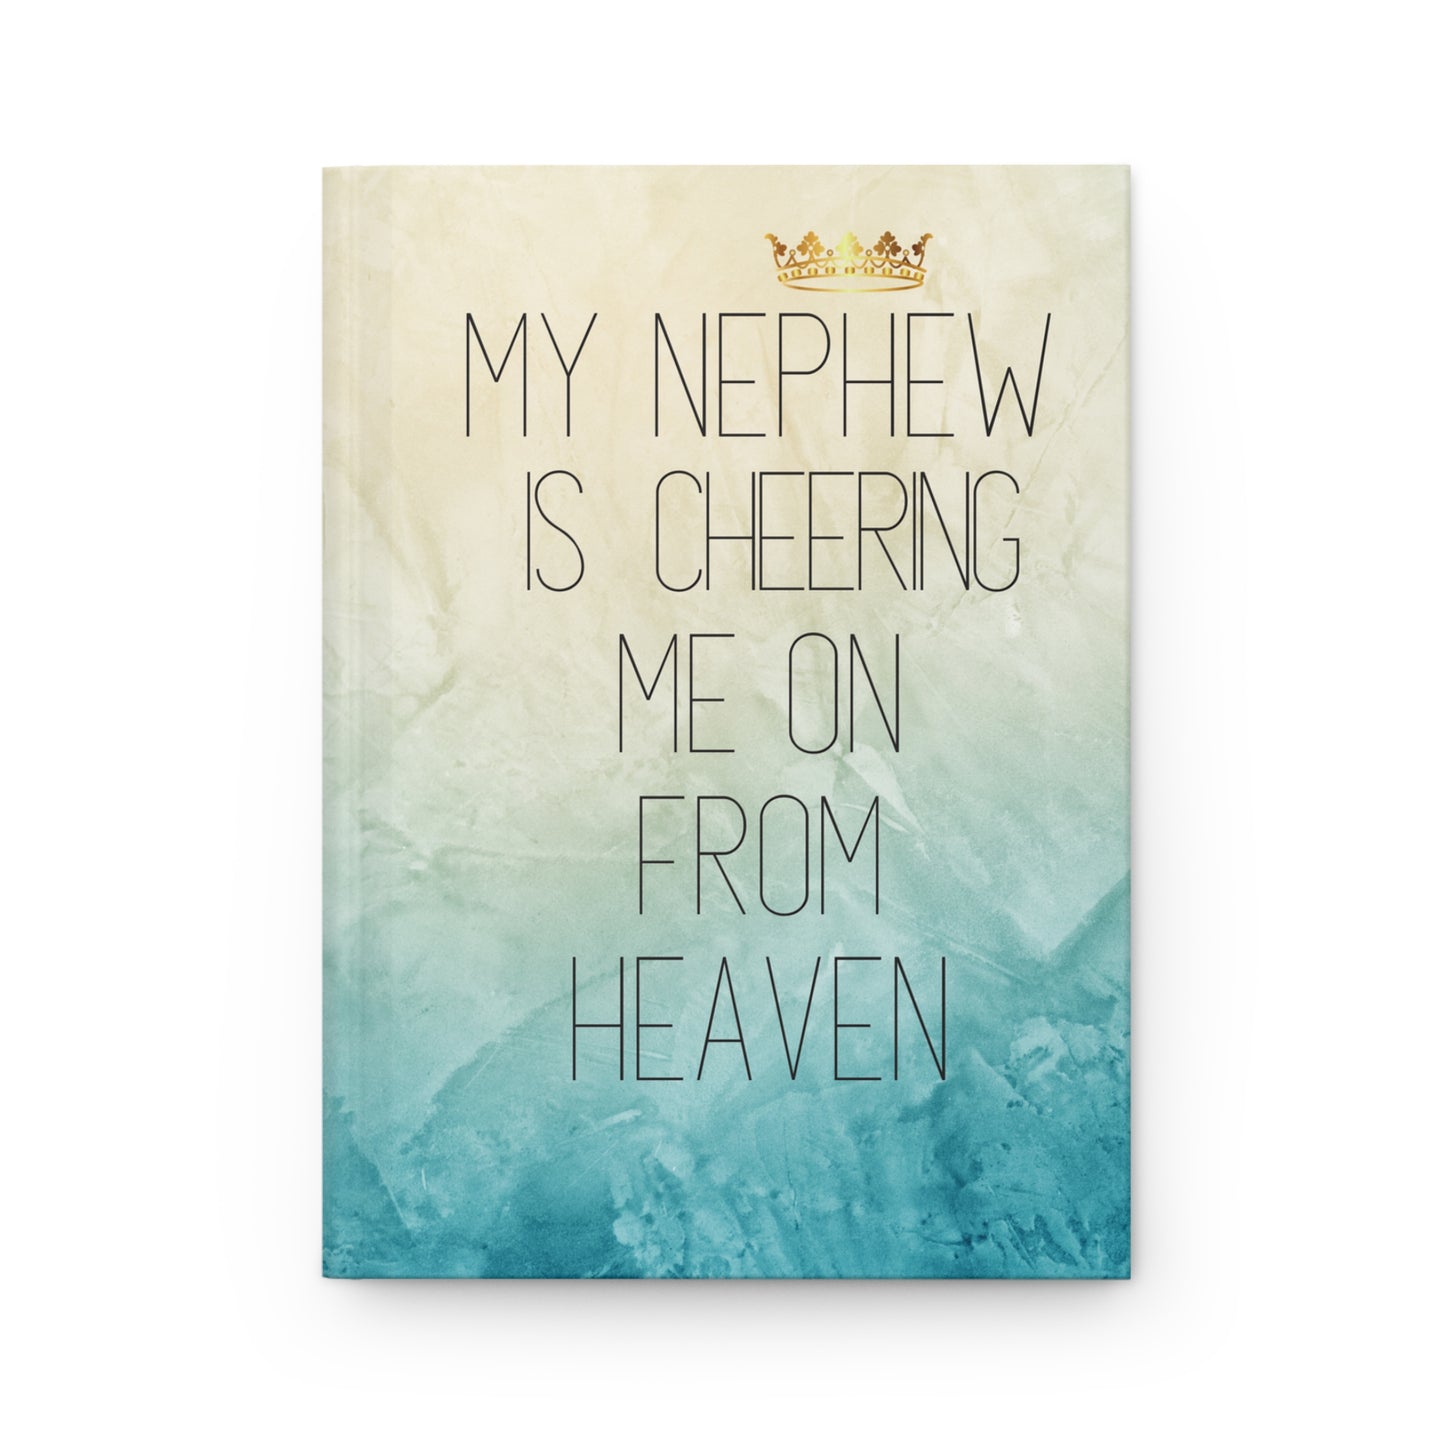 Grief Journal for Loss of Nephew, Cheering Me On From Heaven